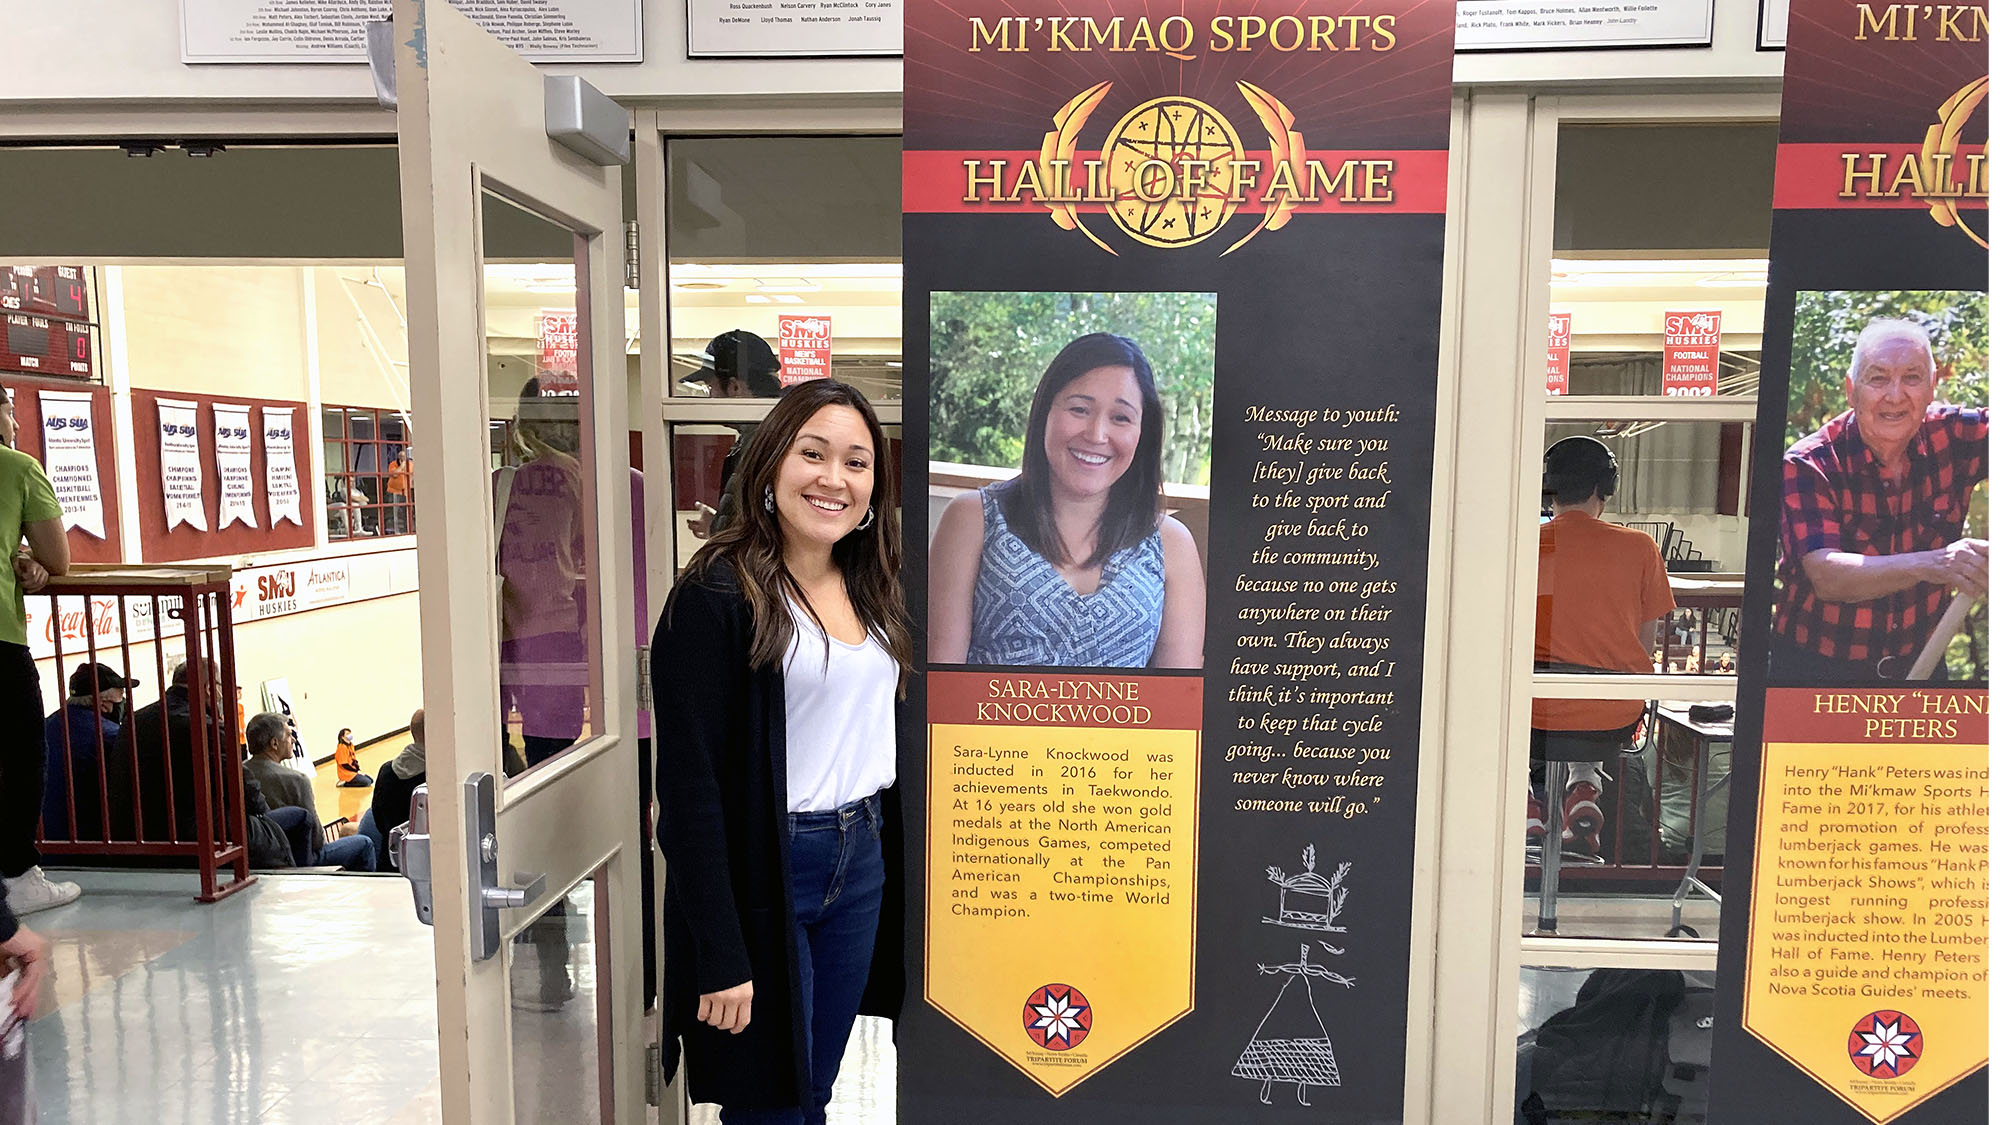 Sara-Lynne Knockwood poses with her Mi'kmaq Sports Hall of Fame banner